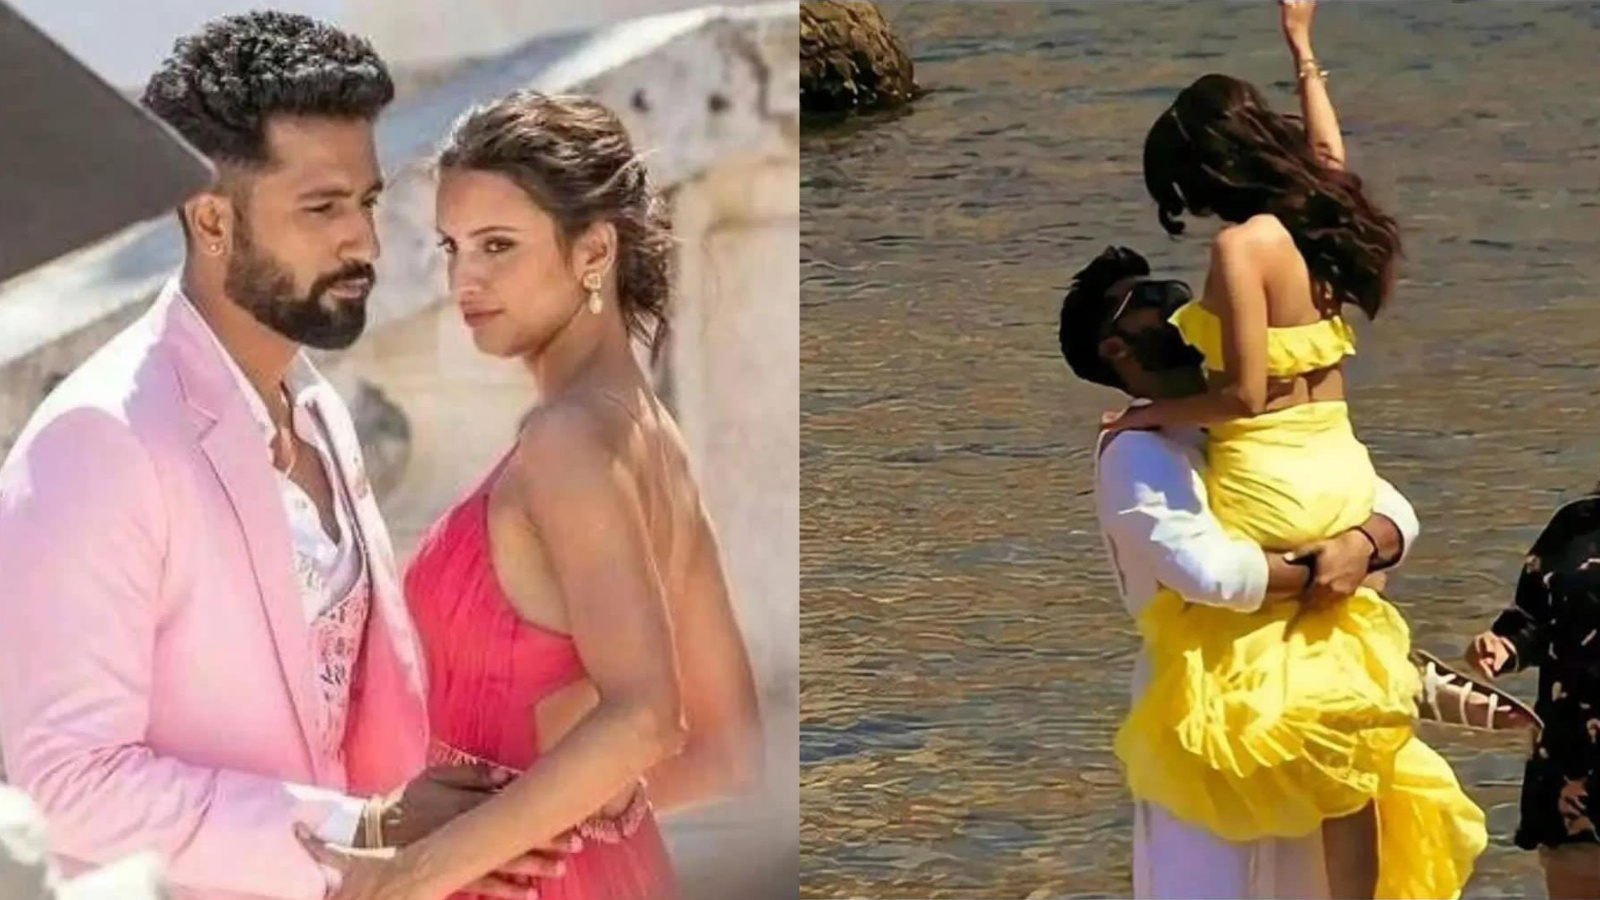 Vicky Kaushal lifts ‘national crush’ Triptii Dimri in leaked pictures from Croatia for their next film | Bollywood News